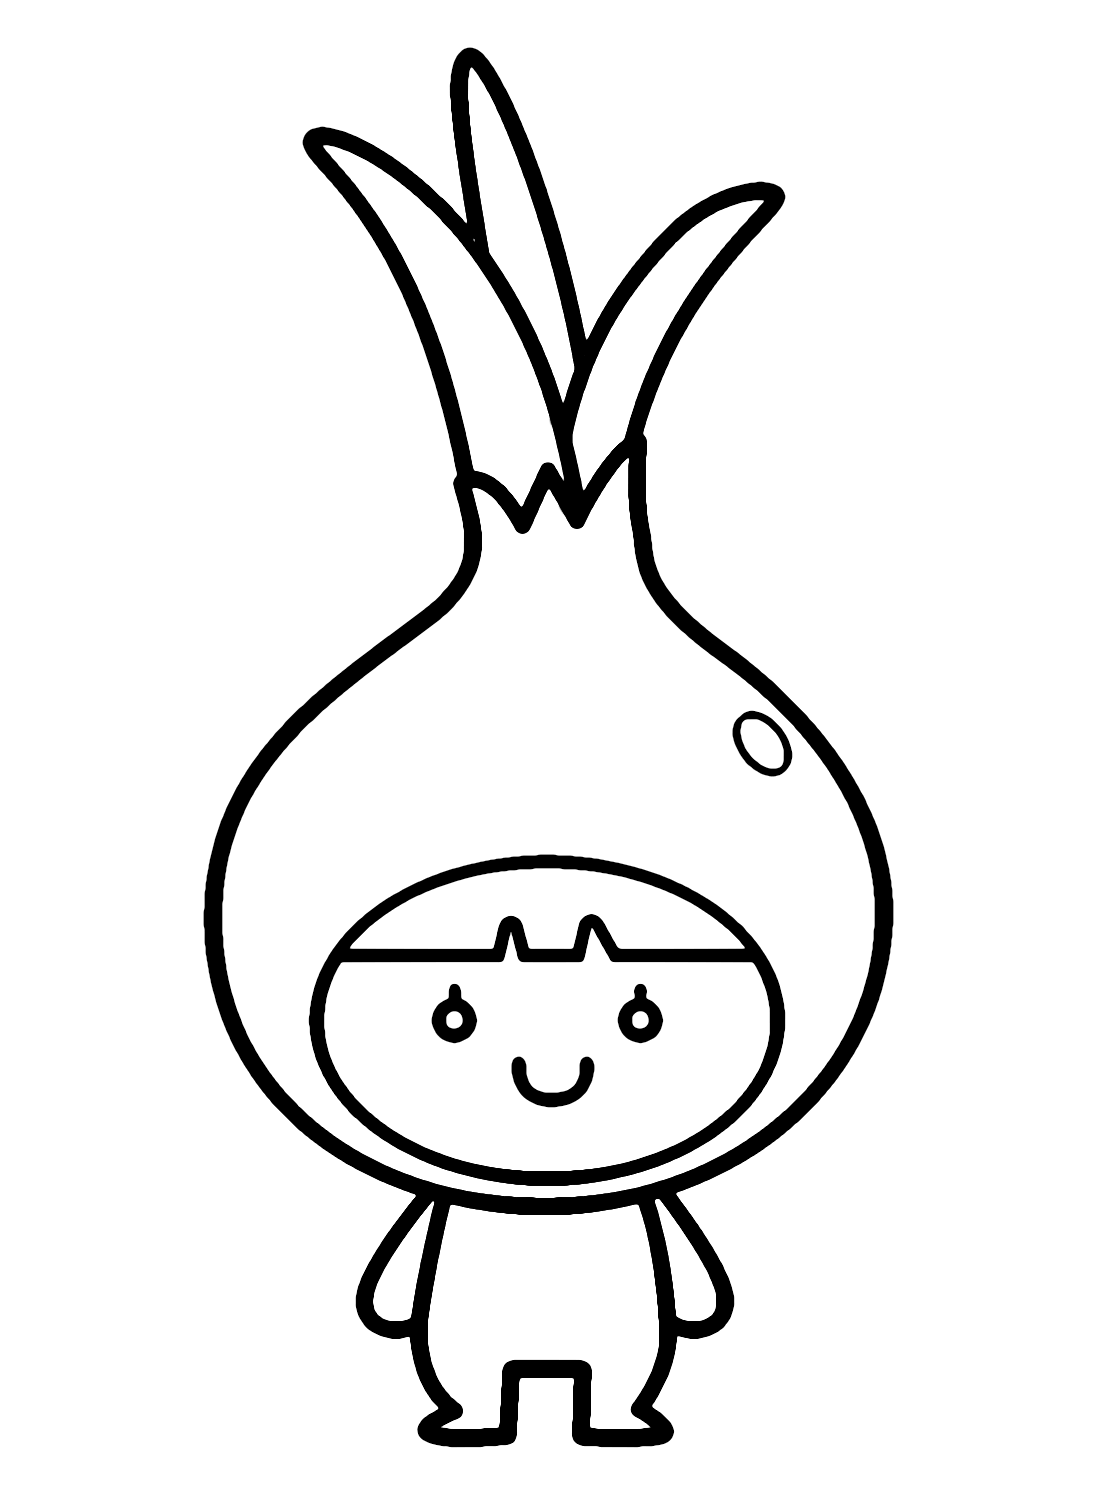 Kid in Onion Costume Coloring Page